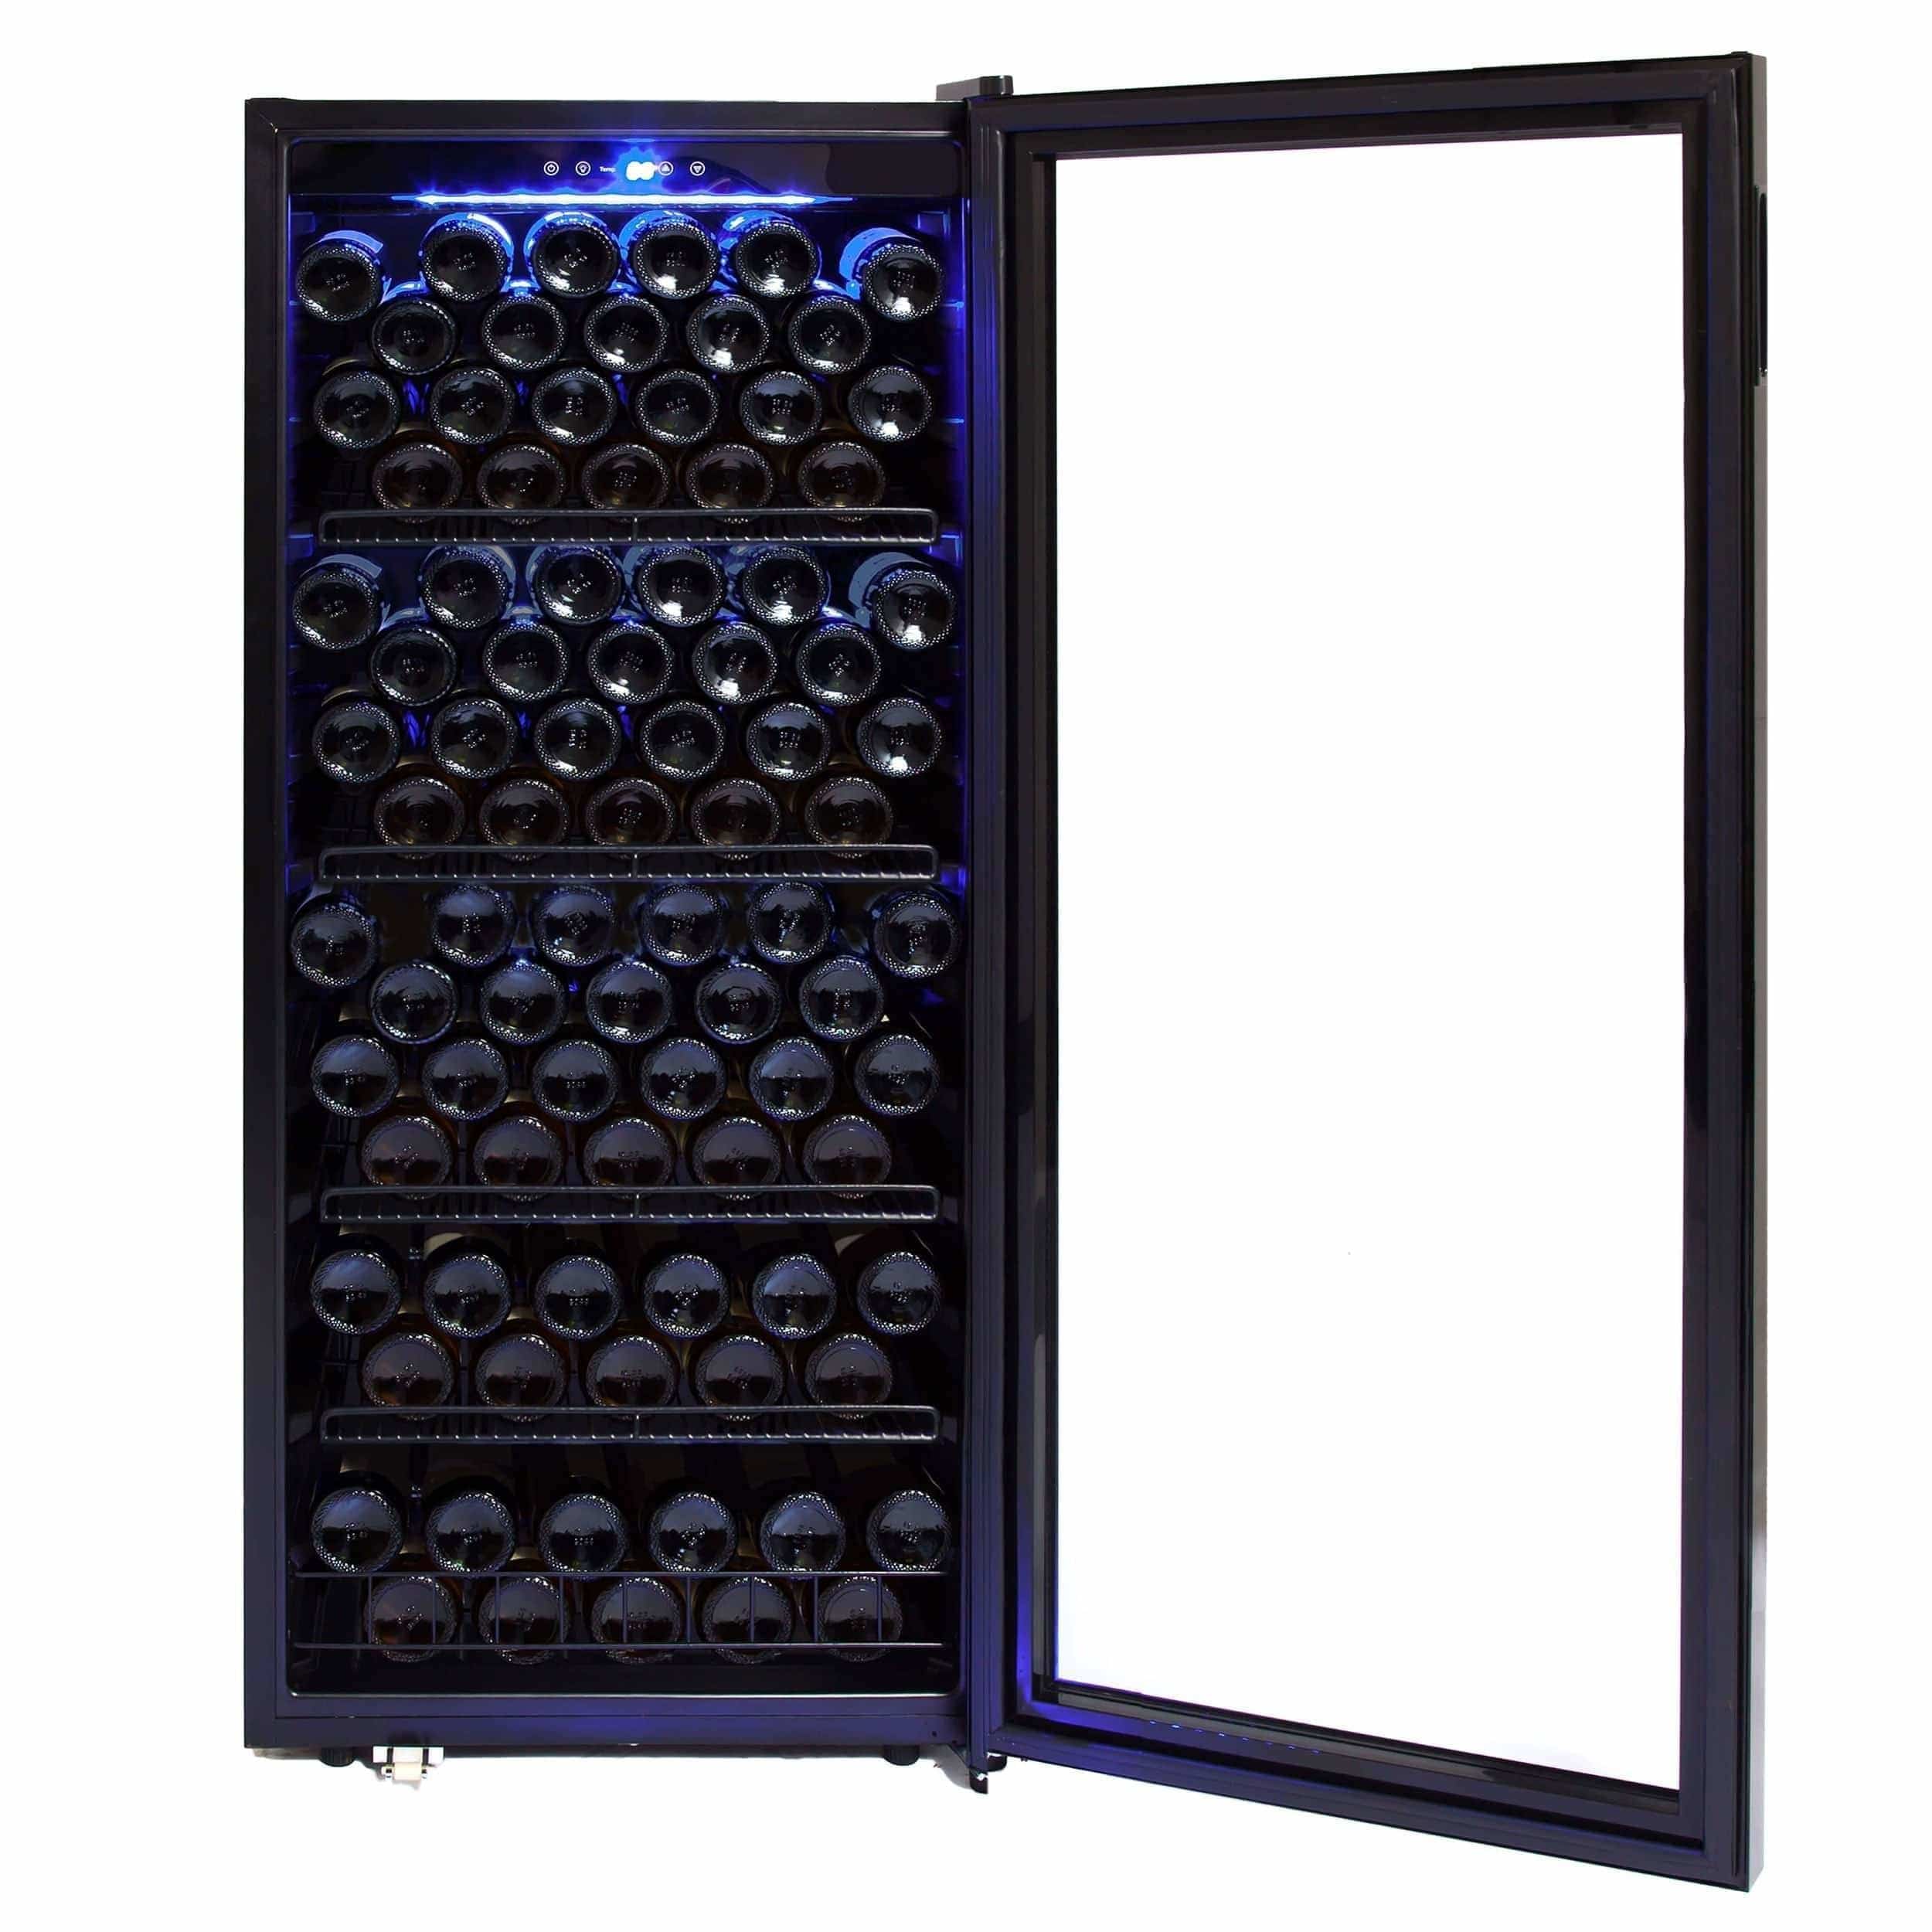 Whynter 124 Bottle Freestanding Wine Cabinet Refrigerator FWC-1201BB Wine Coolers Empire